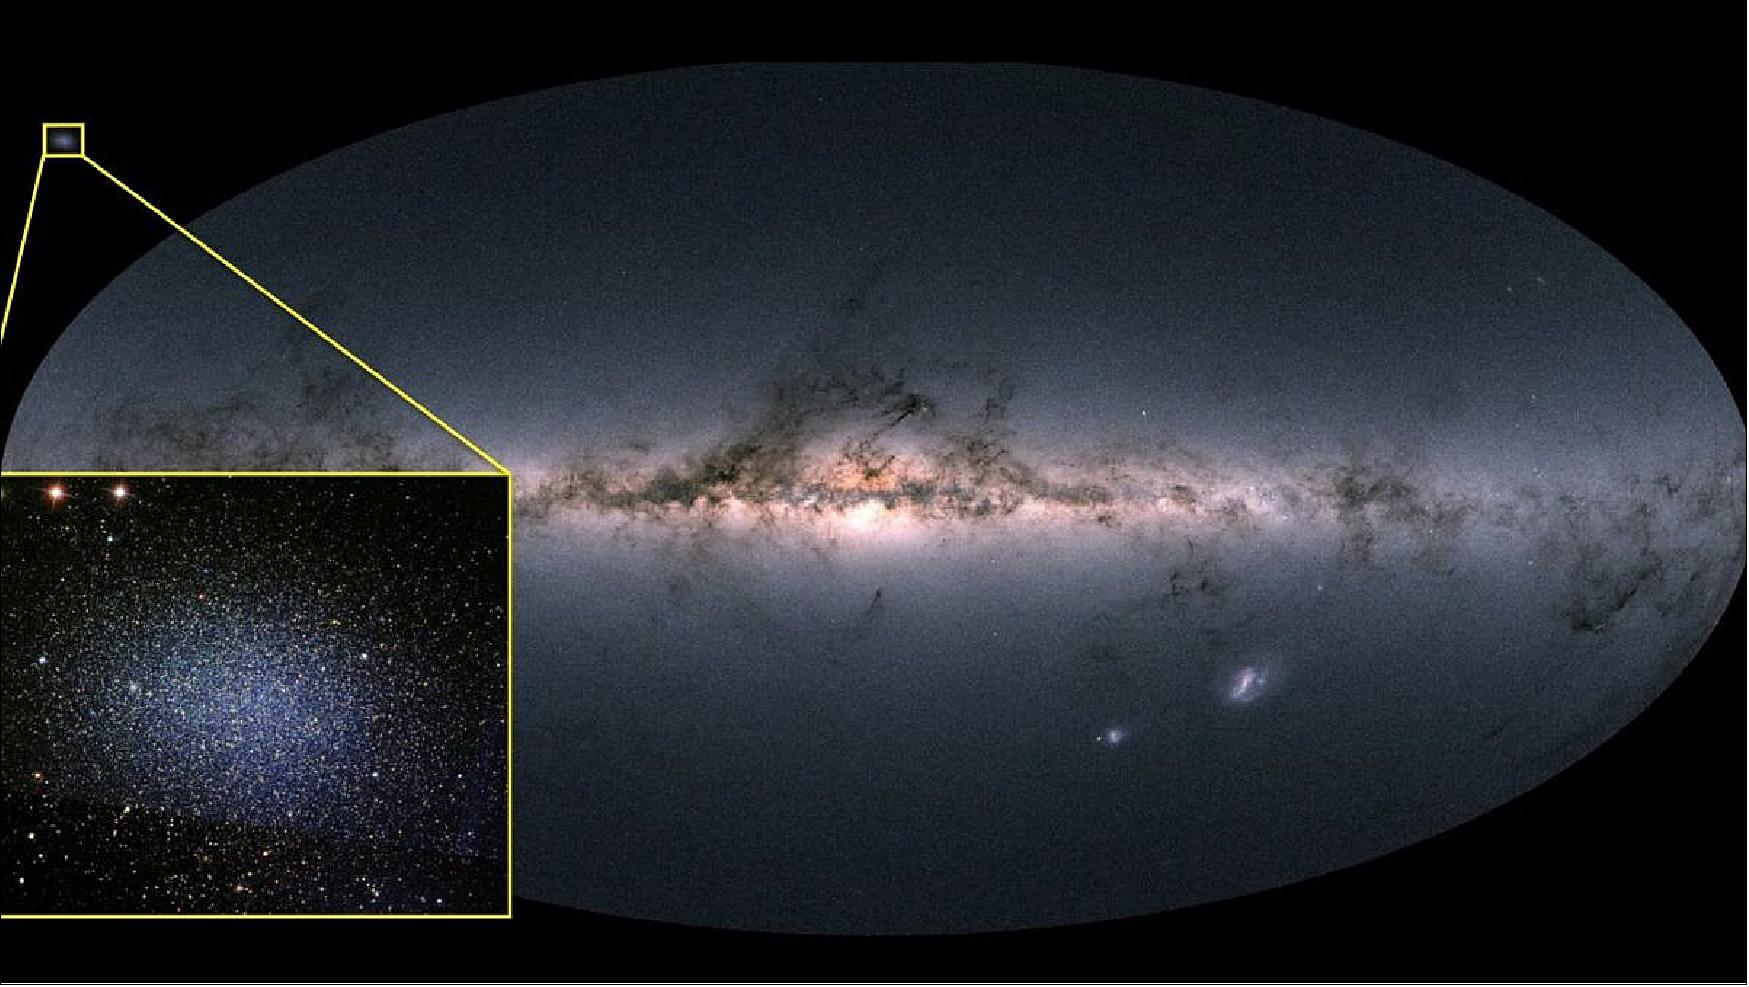 Figure 38: McDonald Observatory astronomers have found that Leo I (inset), a tiny satellite galaxy of the Milky Way (main image), has a black hole nearly as massive as the Milky Way's. Leo I is 30 times smaller than the Milky Way. The result could signal changes in astronomers' understanding of galaxy evolution. Credit: ESA/Gaia/DPAC; SDSS (inset) McDonald Observatory astronomers have found that Leo I (inset), a tiny satellite galaxy of the Milky Way (main image), has a black hole nearly as massive as the Milky Way's. Leo I is 30 times smaller than the Milky Way. The result could signal changes in astronomers' understanding of galaxy evolution [image credit: ESA/Gaia/DPAC; SDSS (inset)]